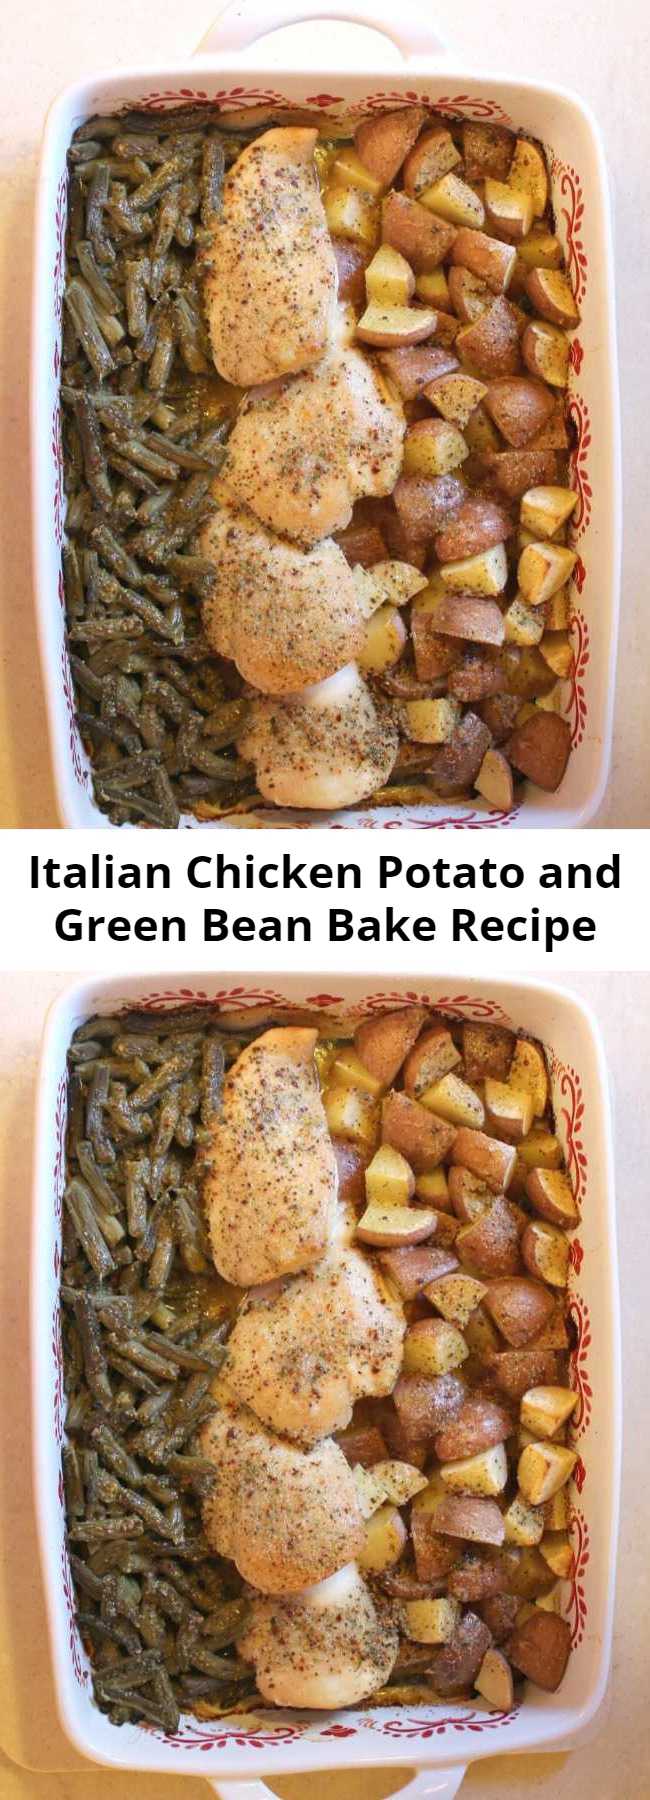 Italian Chicken Potato and Green Bean Bake Recipe - Easy weeknight meal all in one dish. Perfectly seasoned chicken, potatoes, and veggies makes a kid and adult favorite.